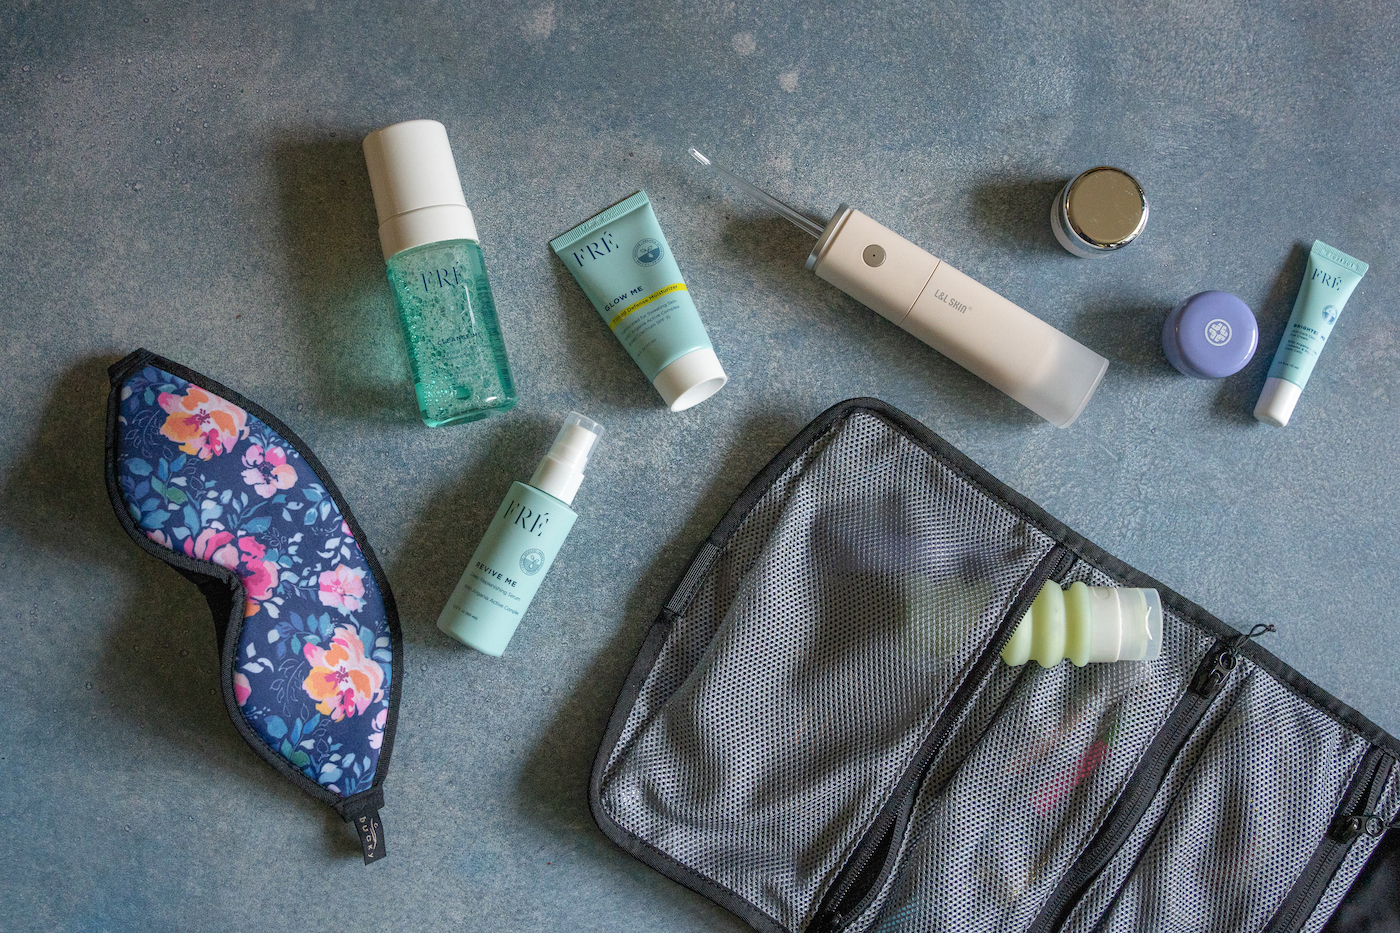 How to Make a Toiletry Kit